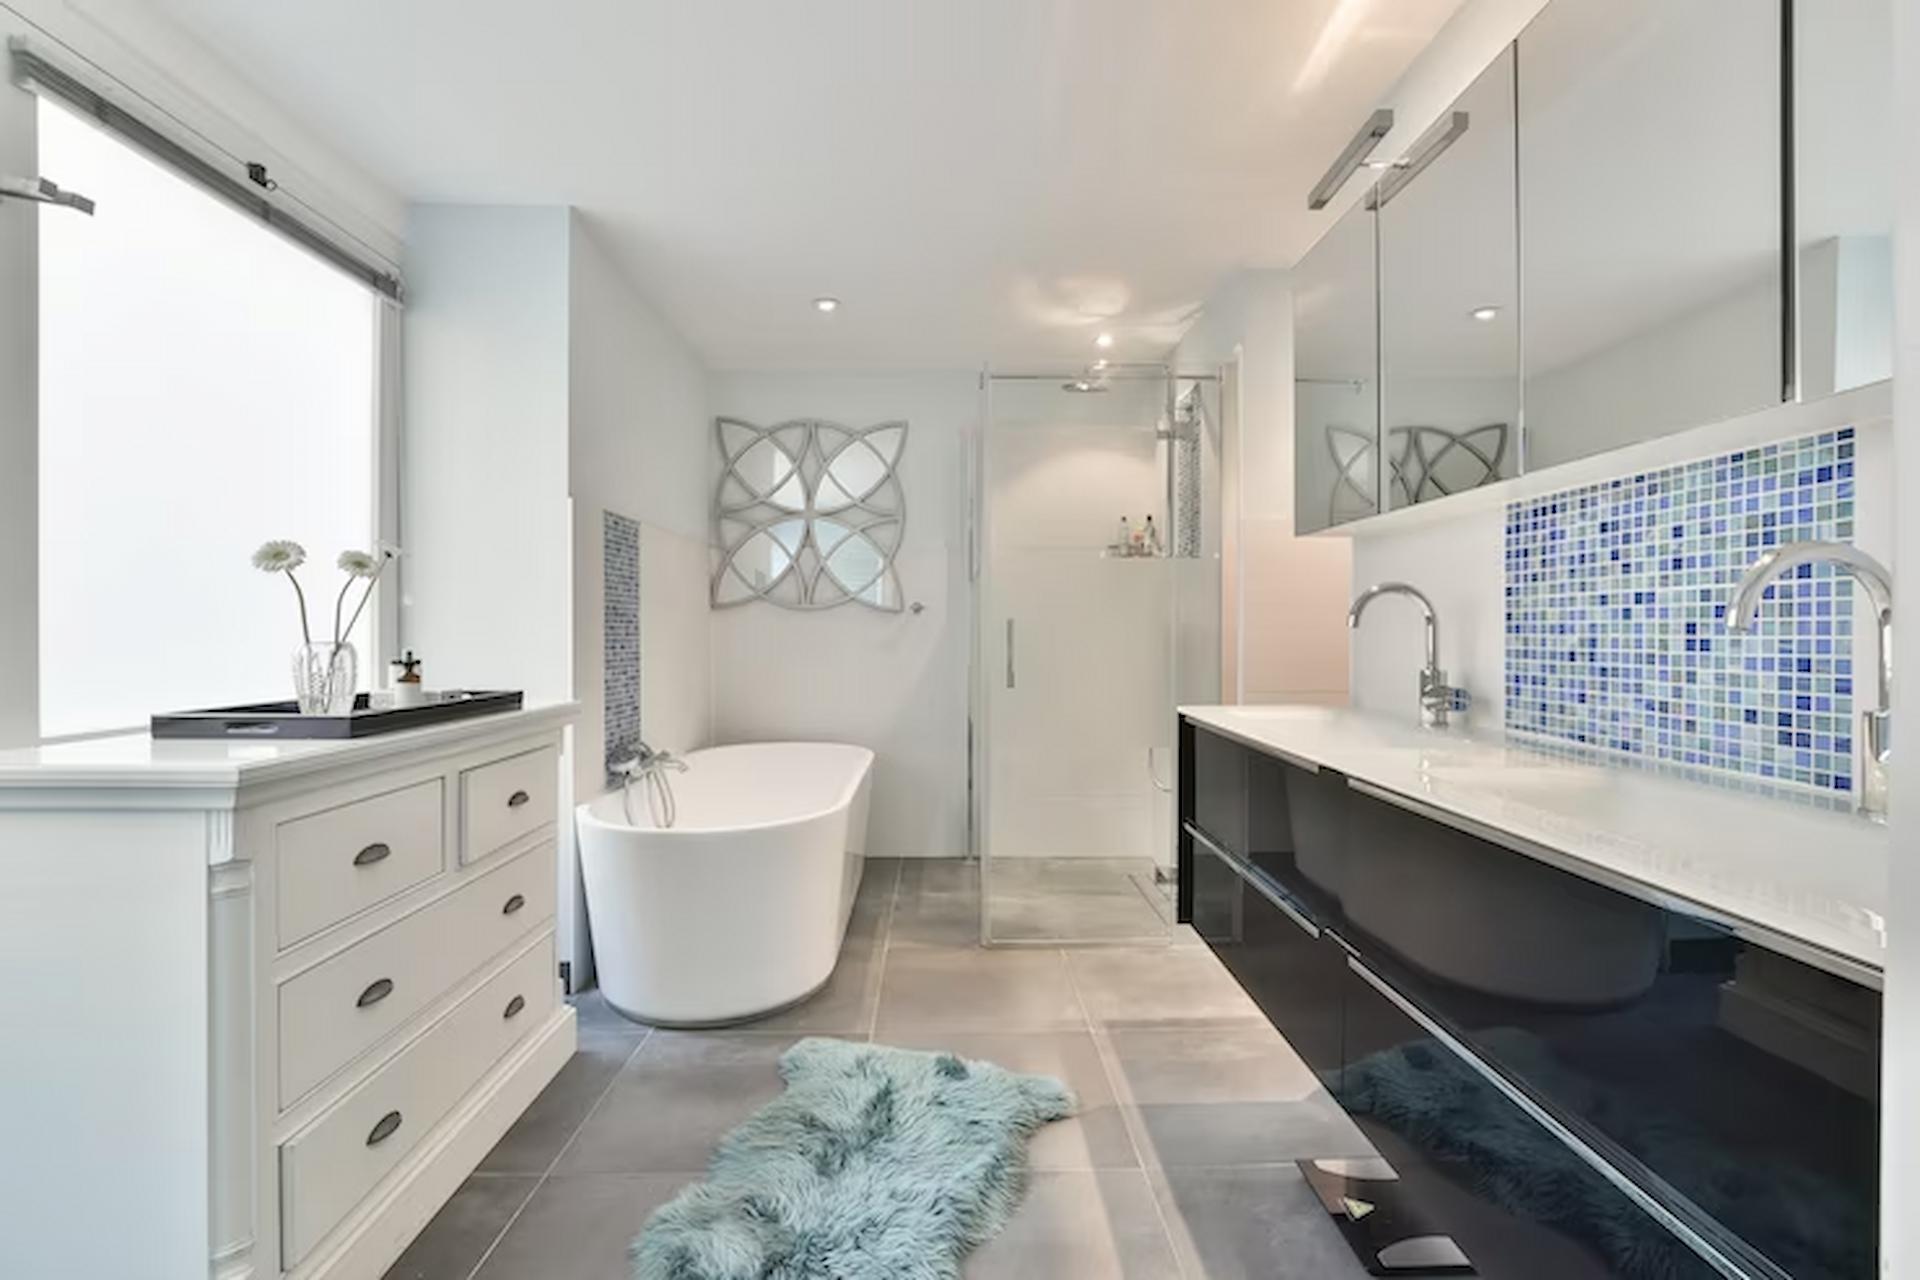 Metairie’s Bathroom Remodeling: Style and Functionality